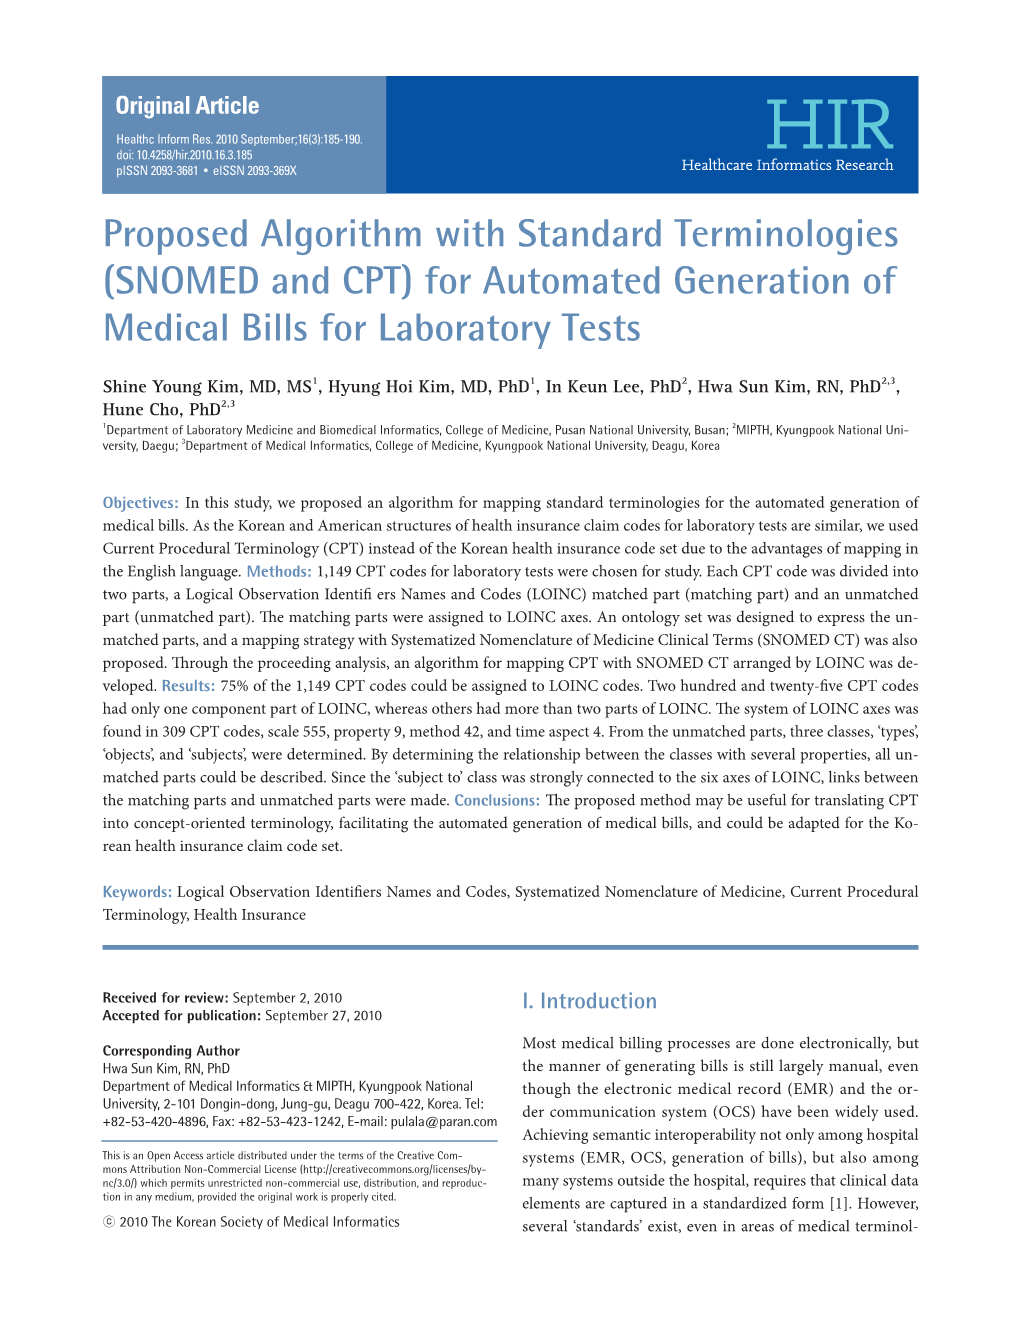 For Automated Generation of Medical Bills for Laboratory Tests